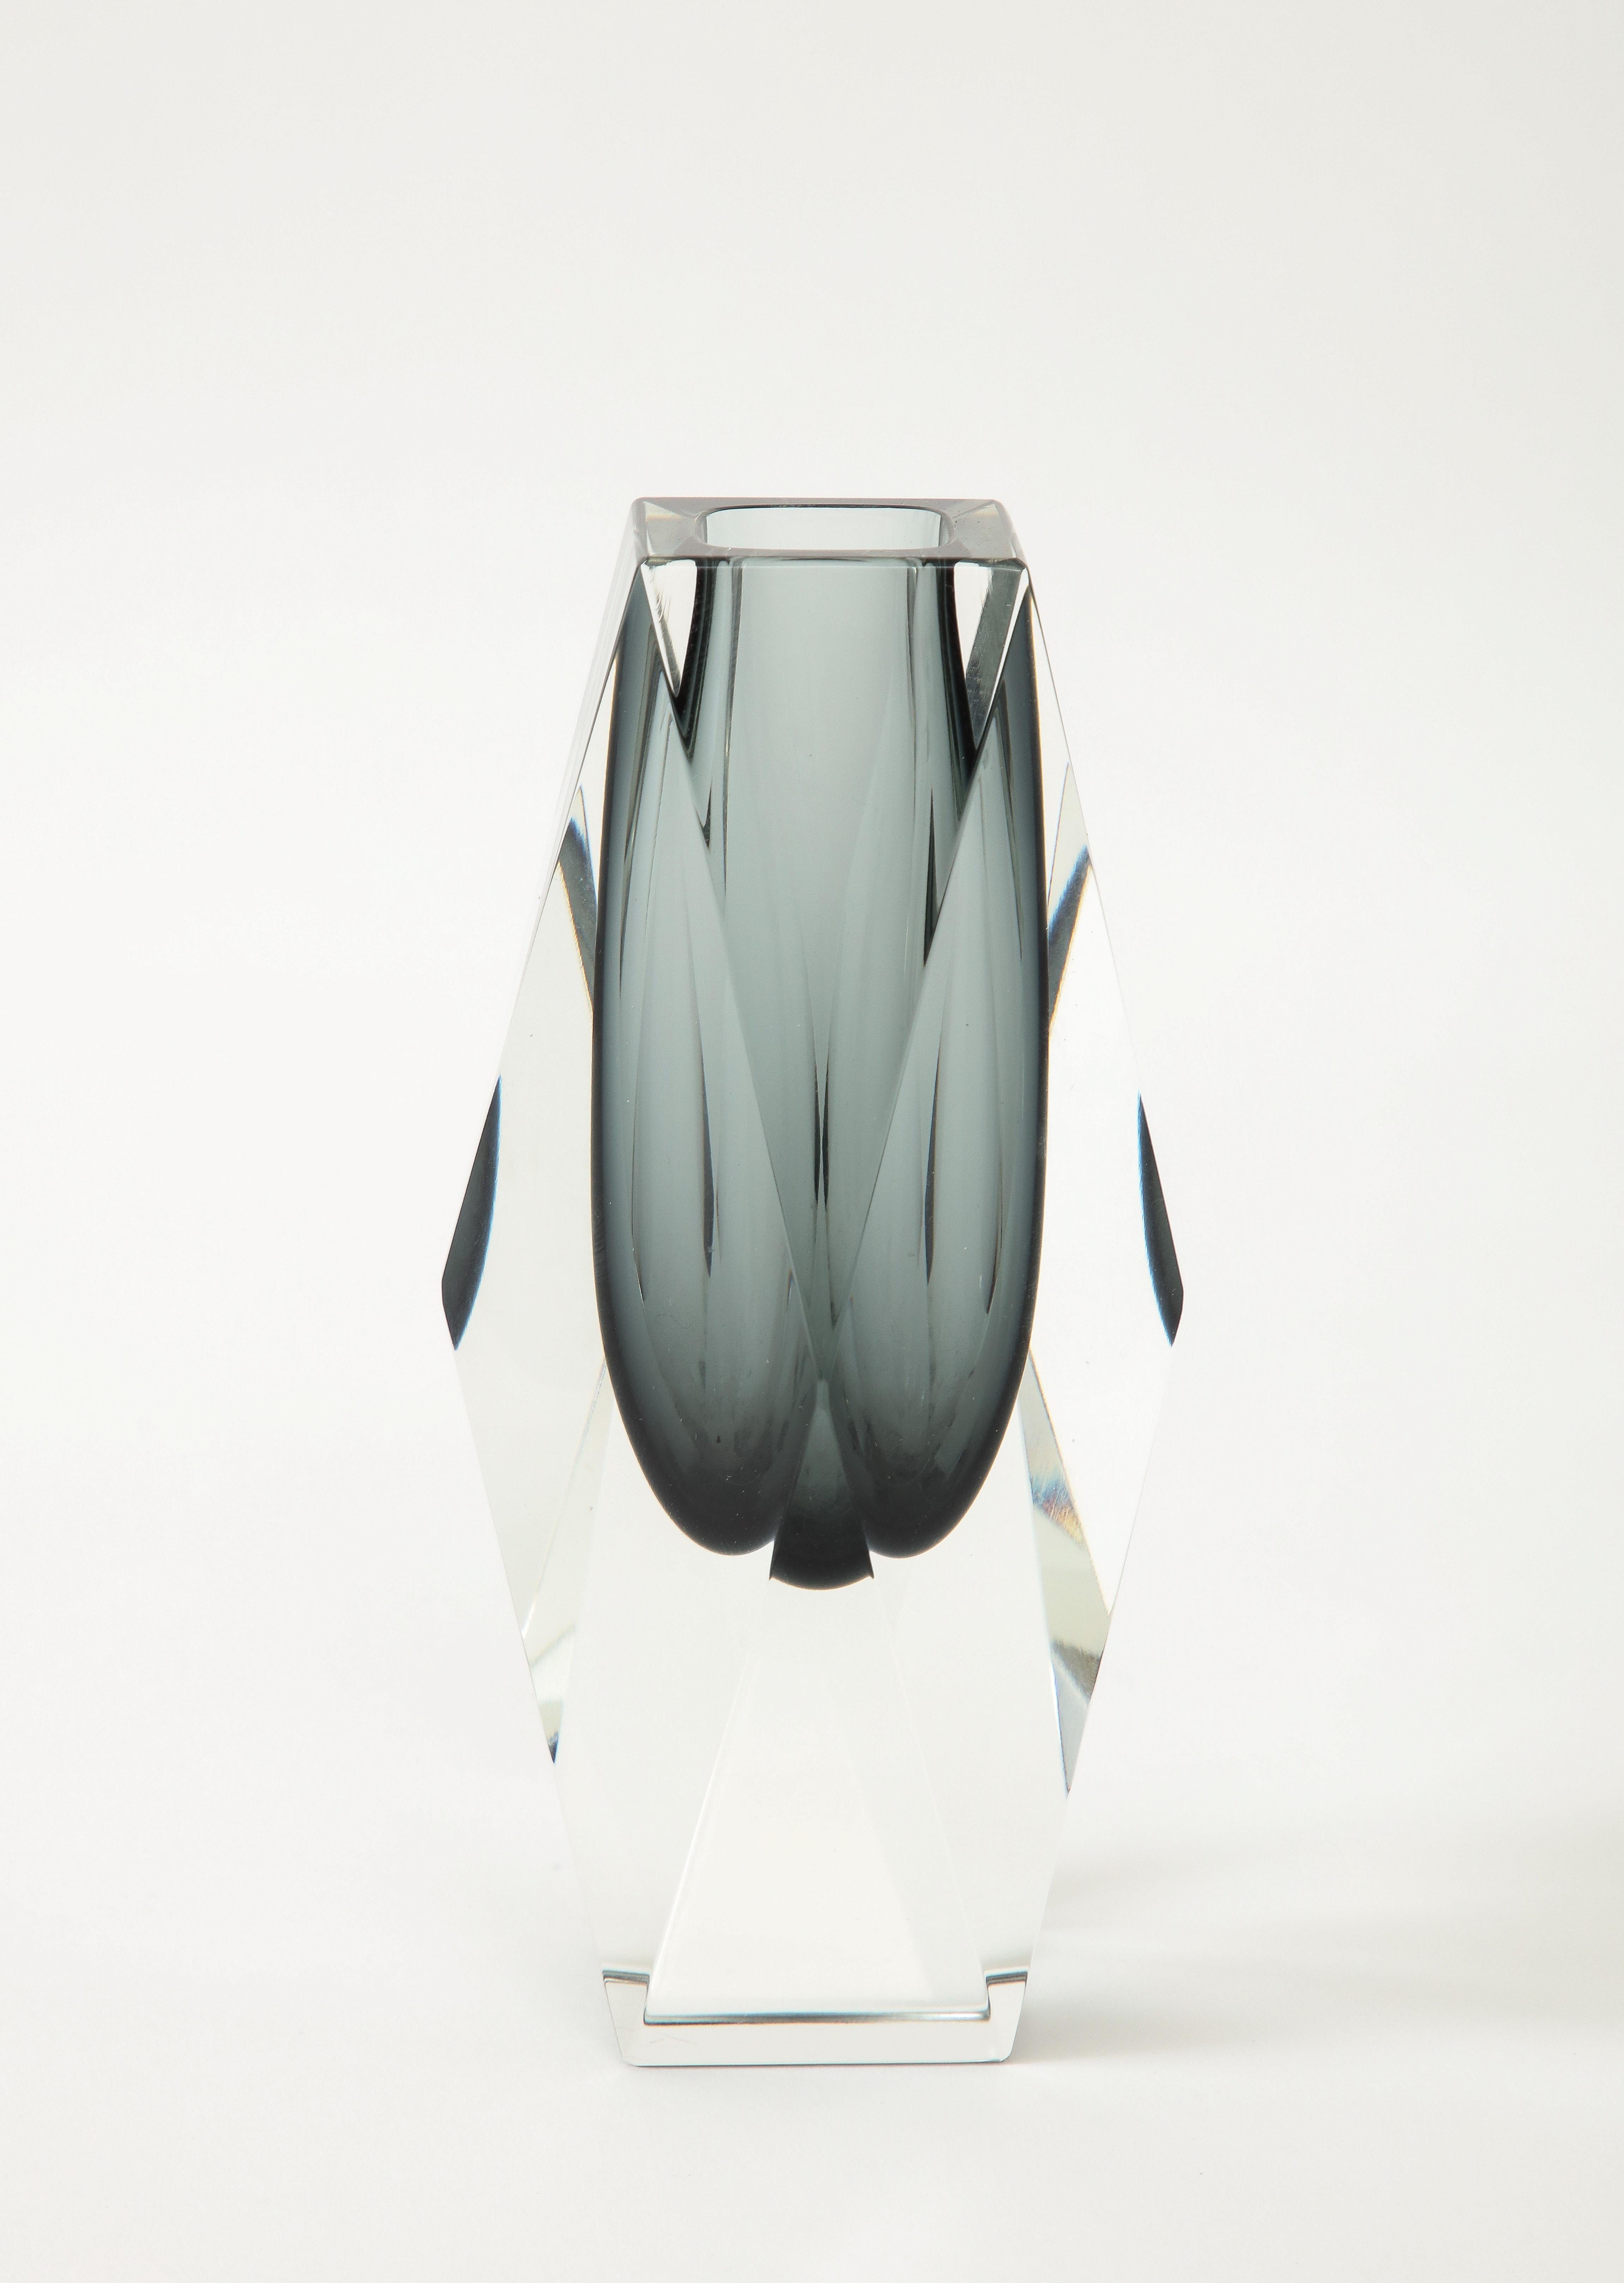 Set of Two 1970's  Faceted Murano Glass Sommerso vases By Flavio Poli. For Sale 4